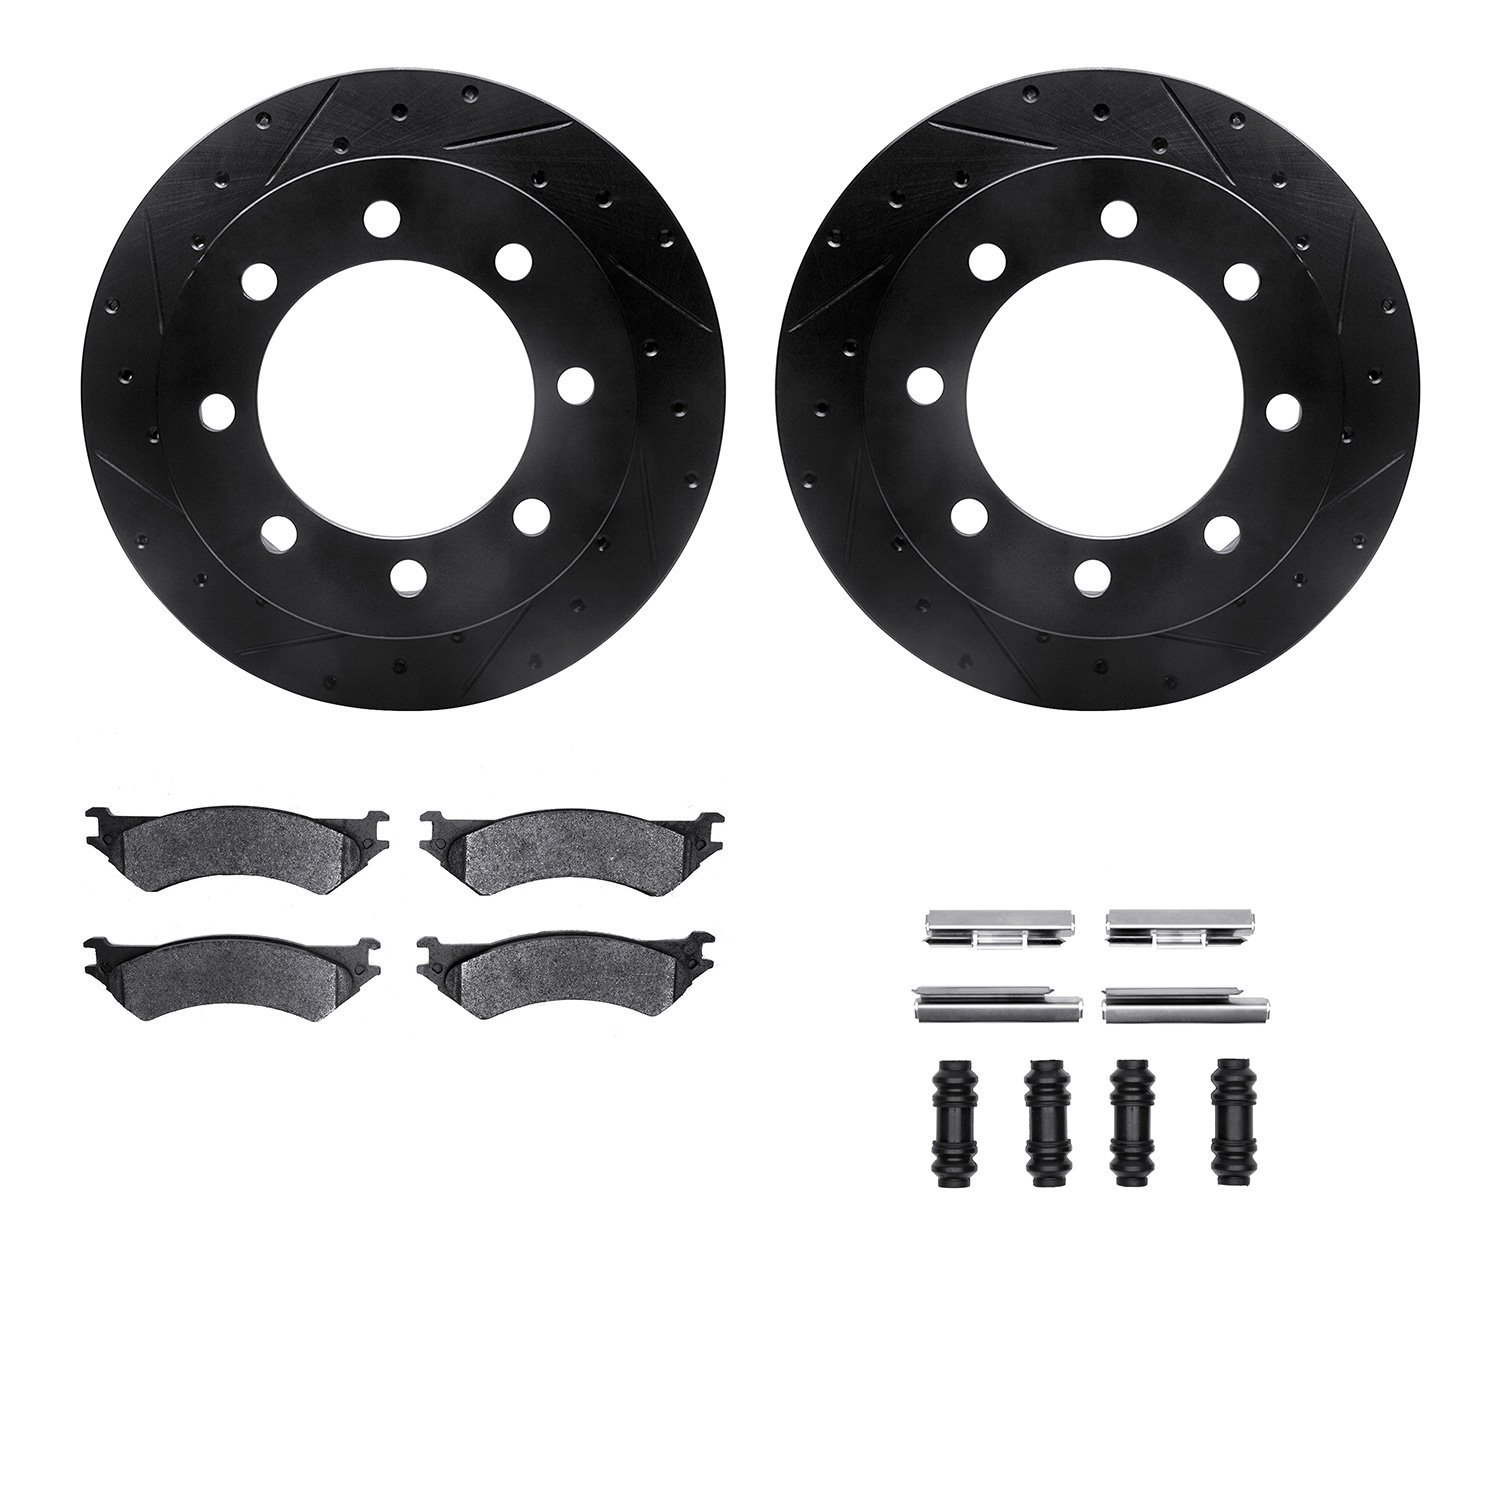 8412-54054 Drilled/Slotted Brake Rotors with Ultimate-Duty Brake Pads Kit & Hardware [Black], 1999-2007 Ford/Lincoln/Mercury/Maz